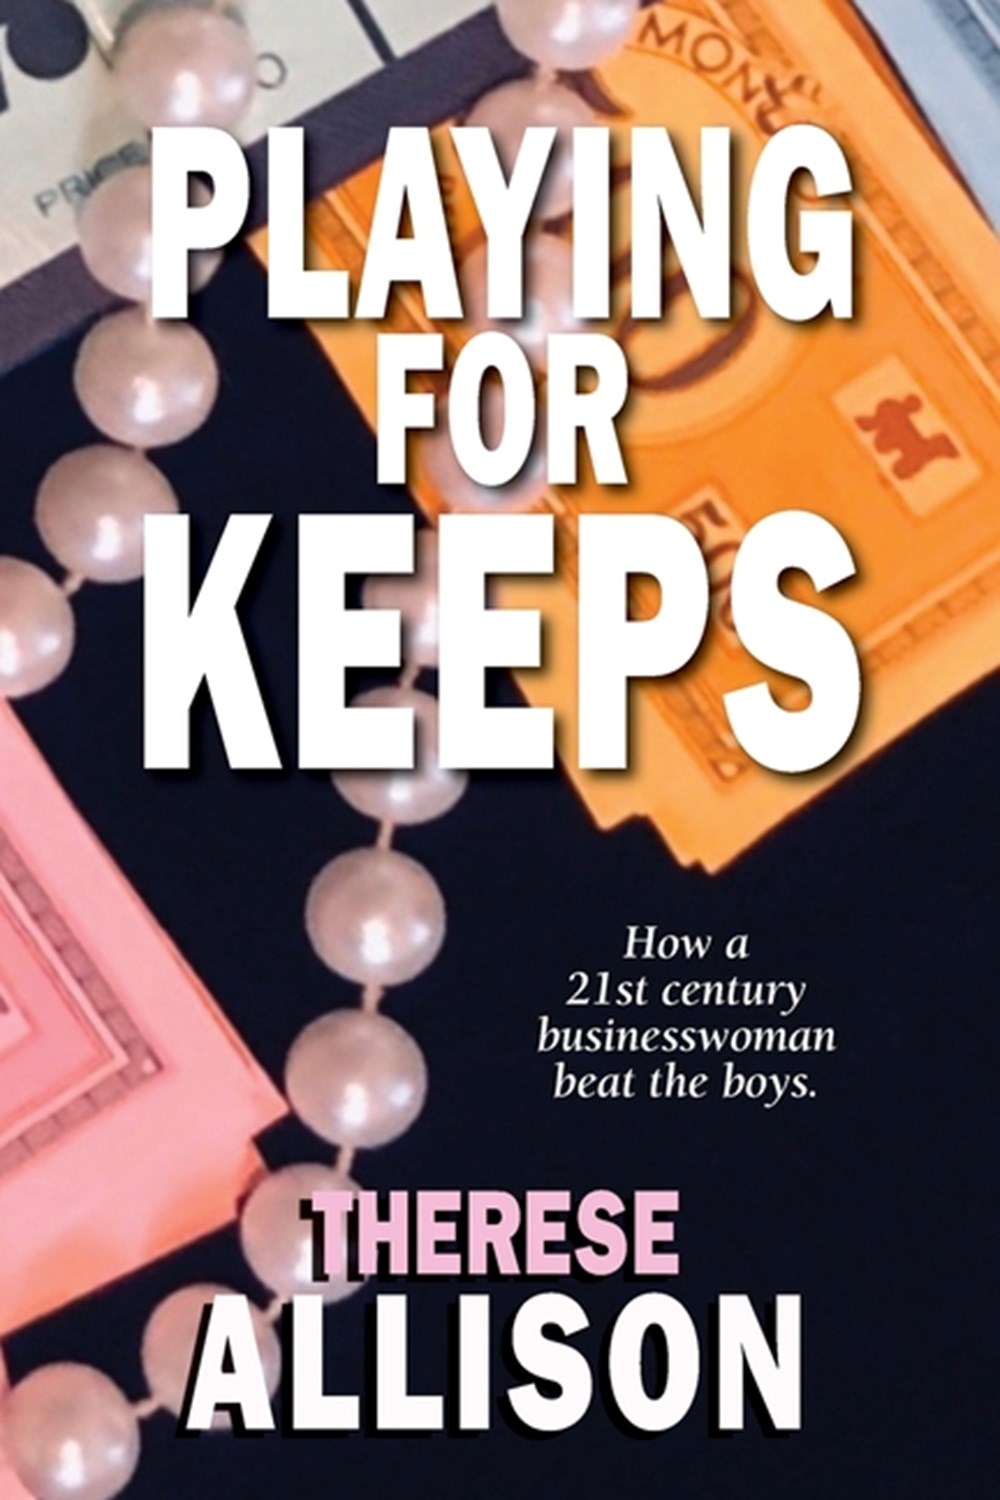 Playing for Keeps How a 21st century businesswoman beat the boys.